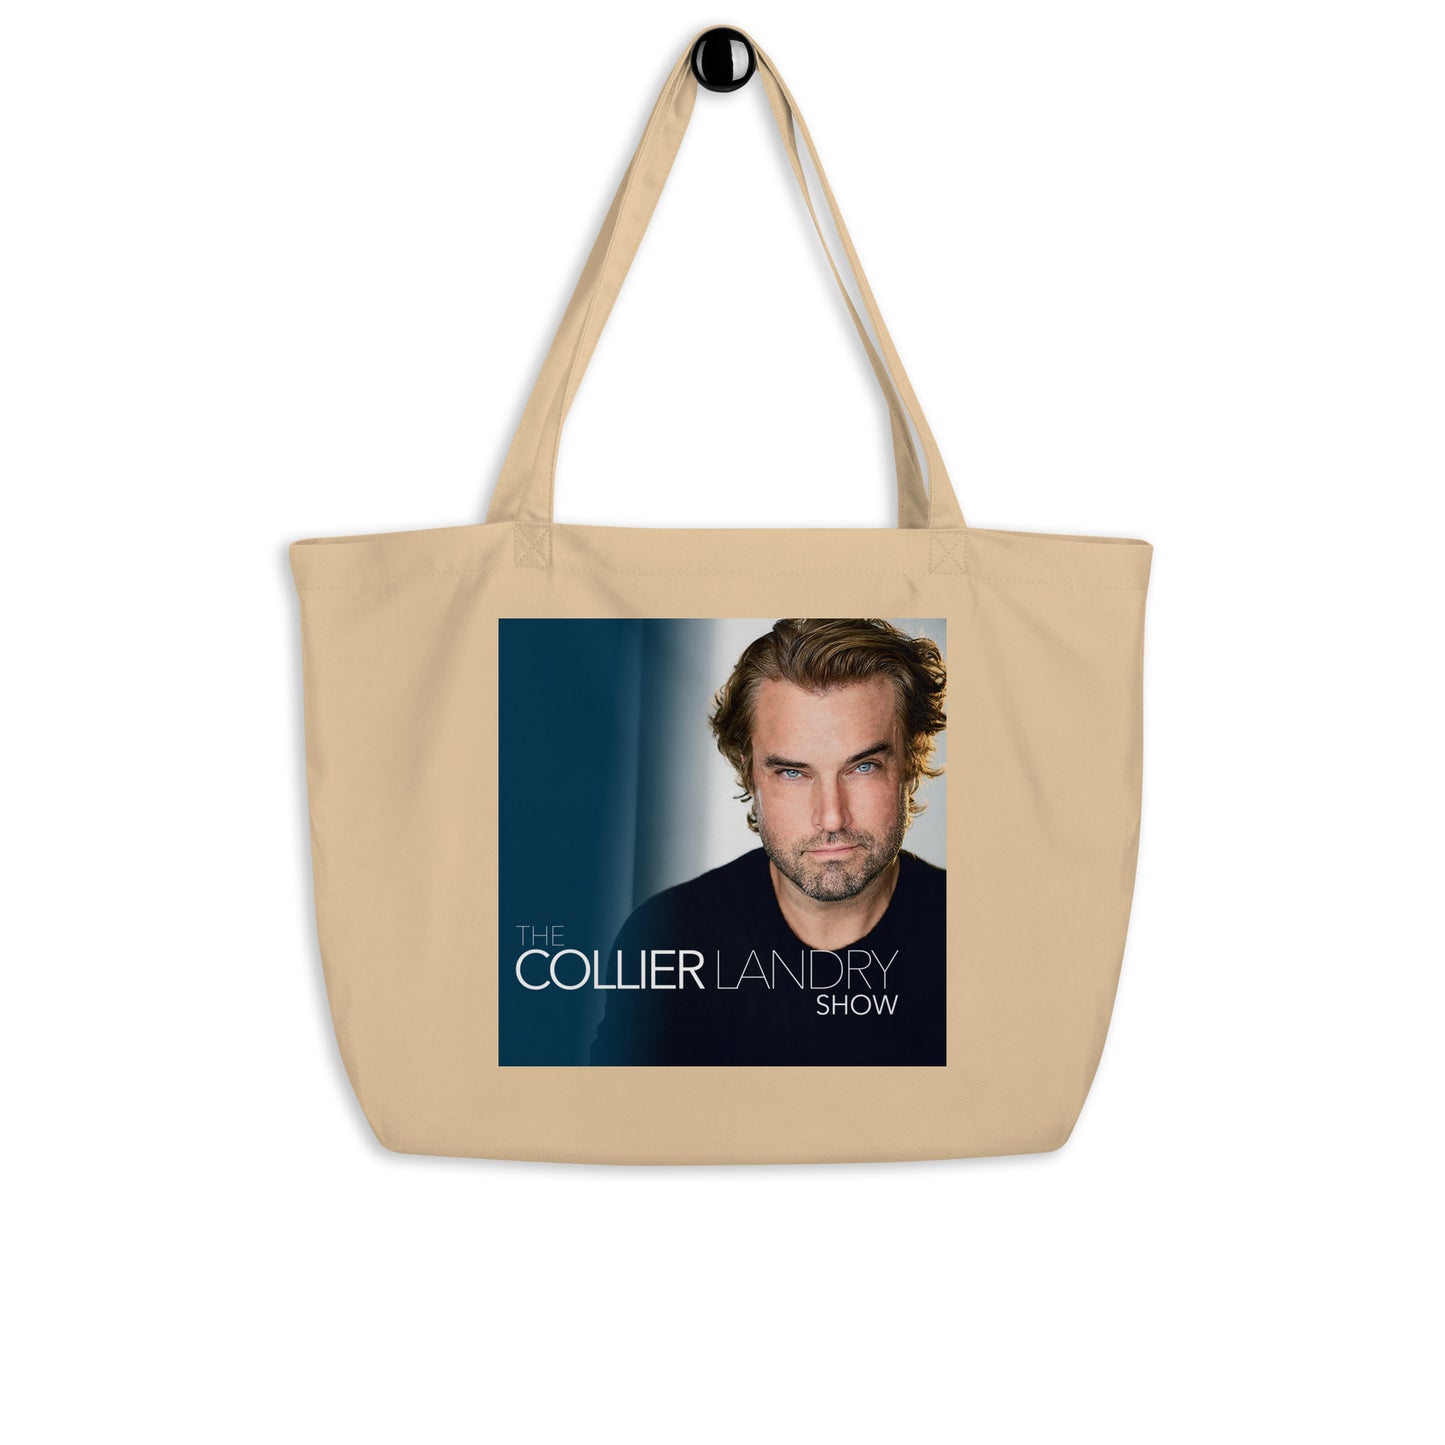 The Podcast Tote Bag